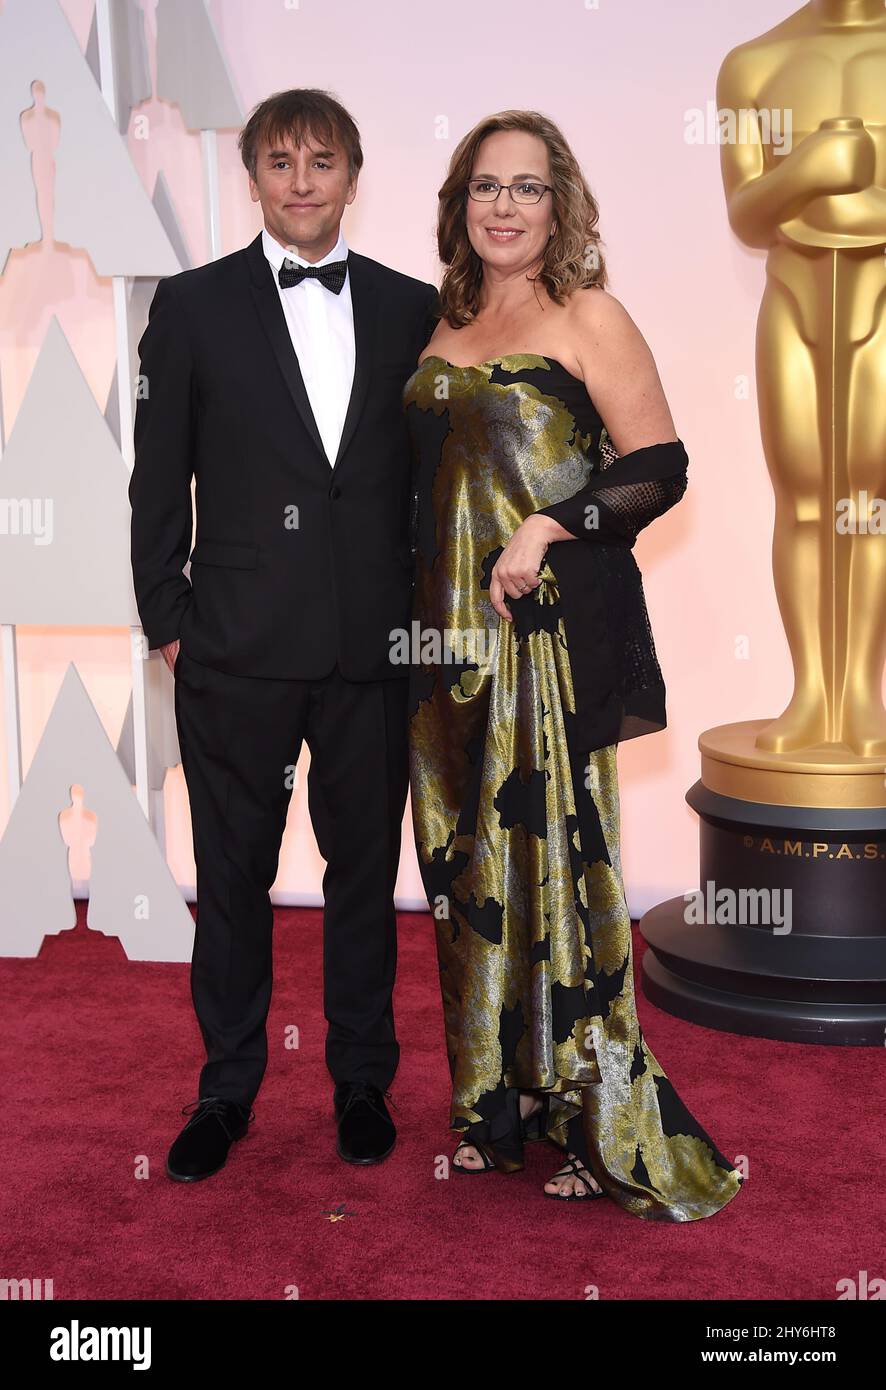 Richard Linklater and Christina Harrison attending the 87th Annual Academy Awards held at the Dolby Theatre in Los Angeles, USA. Stock Photo